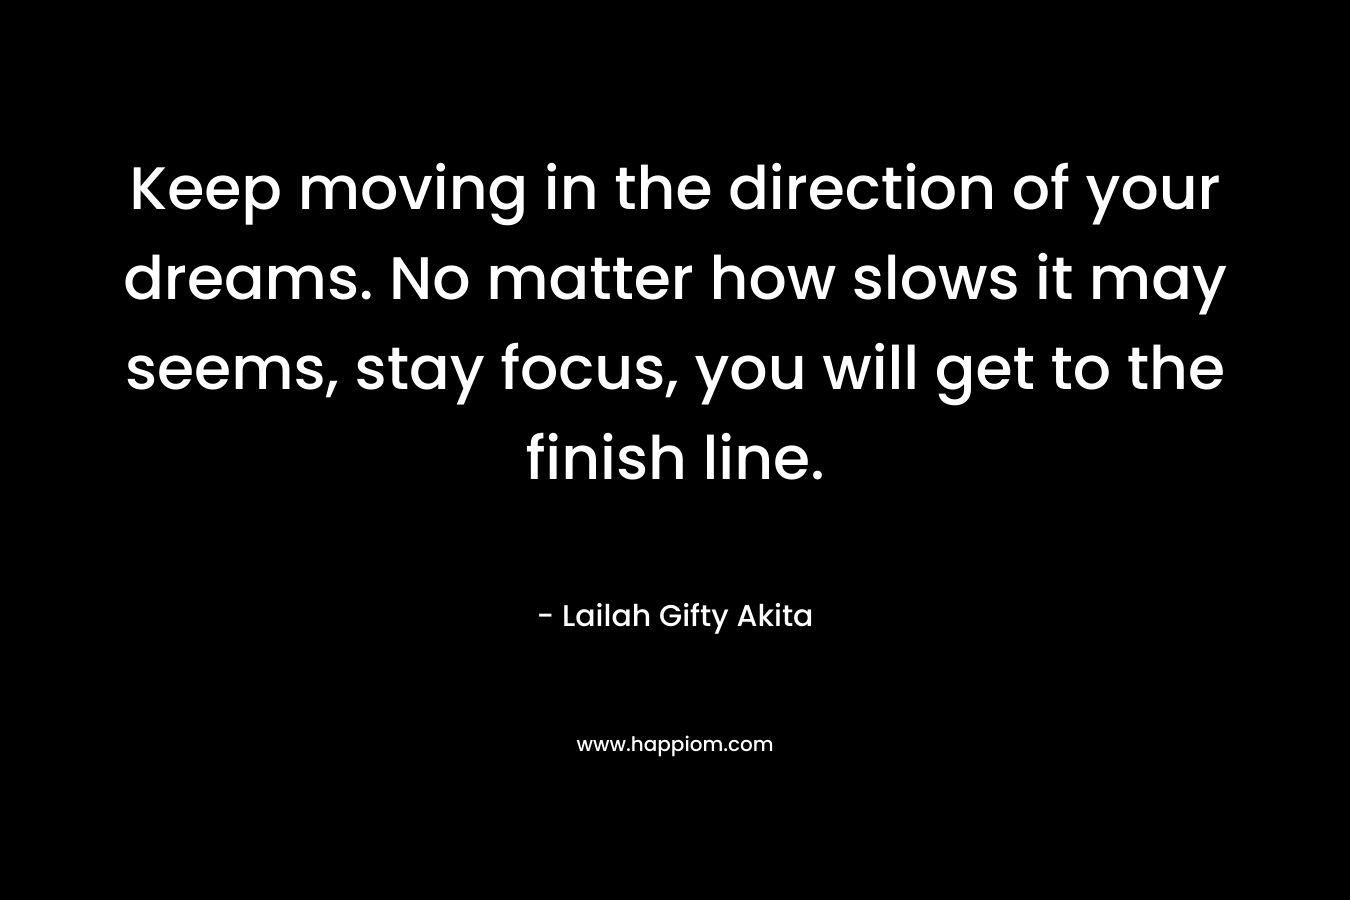 Keep moving in the direction of your dreams. No matter how slows it may seems, stay focus, you will get to the finish line. – Lailah Gifty Akita